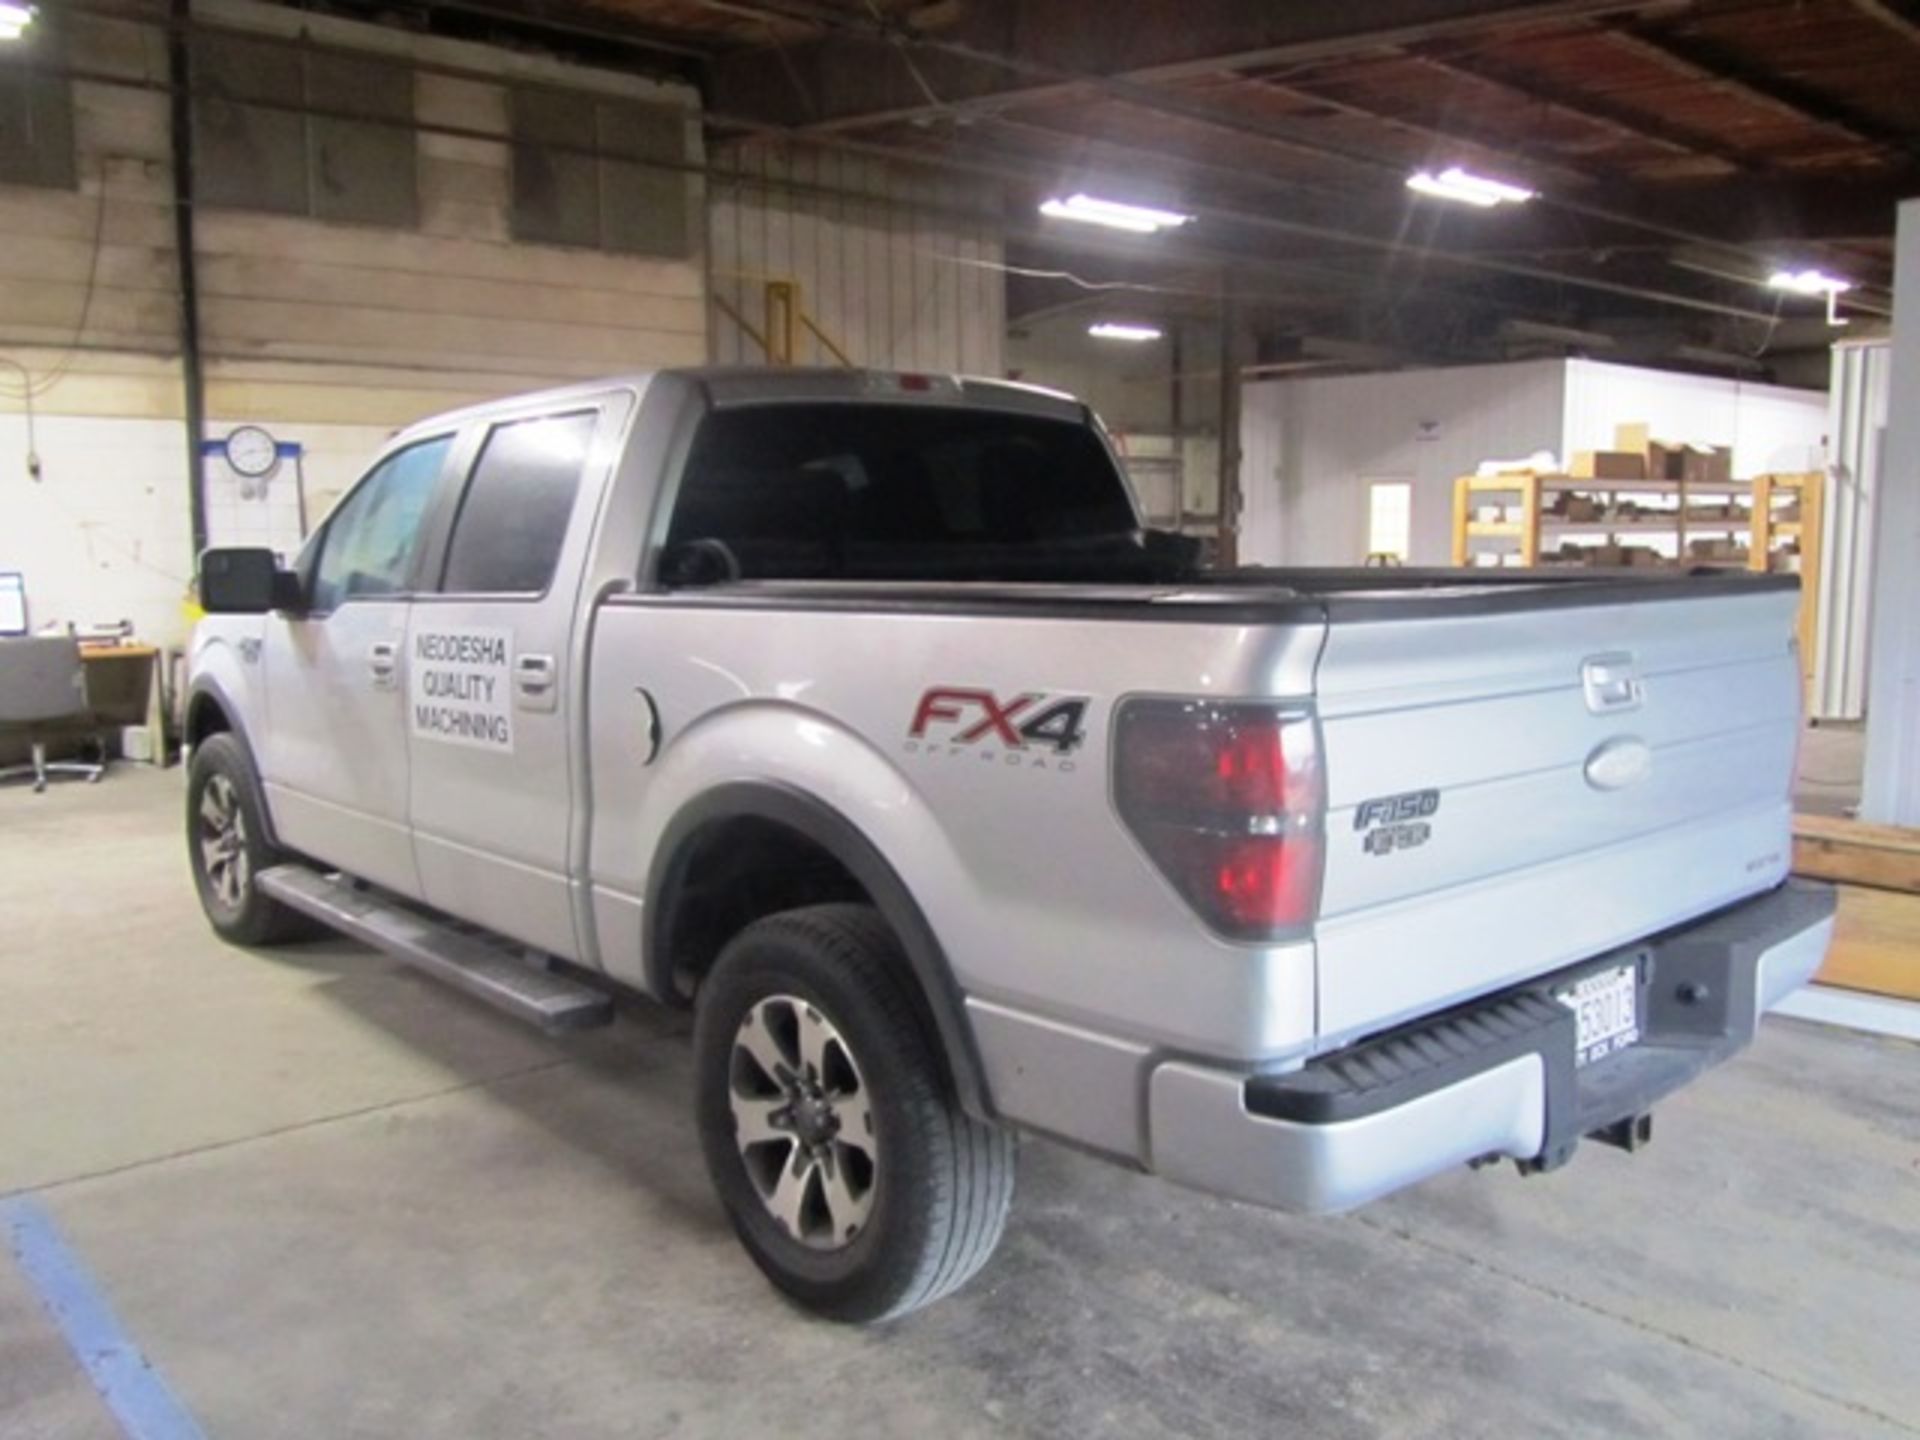 Ford F150 FX4 Crew Cab Pick-Up Truck with Short Bed, Running Boards, Automatic Transmission, 5.4 - Image 2 of 6